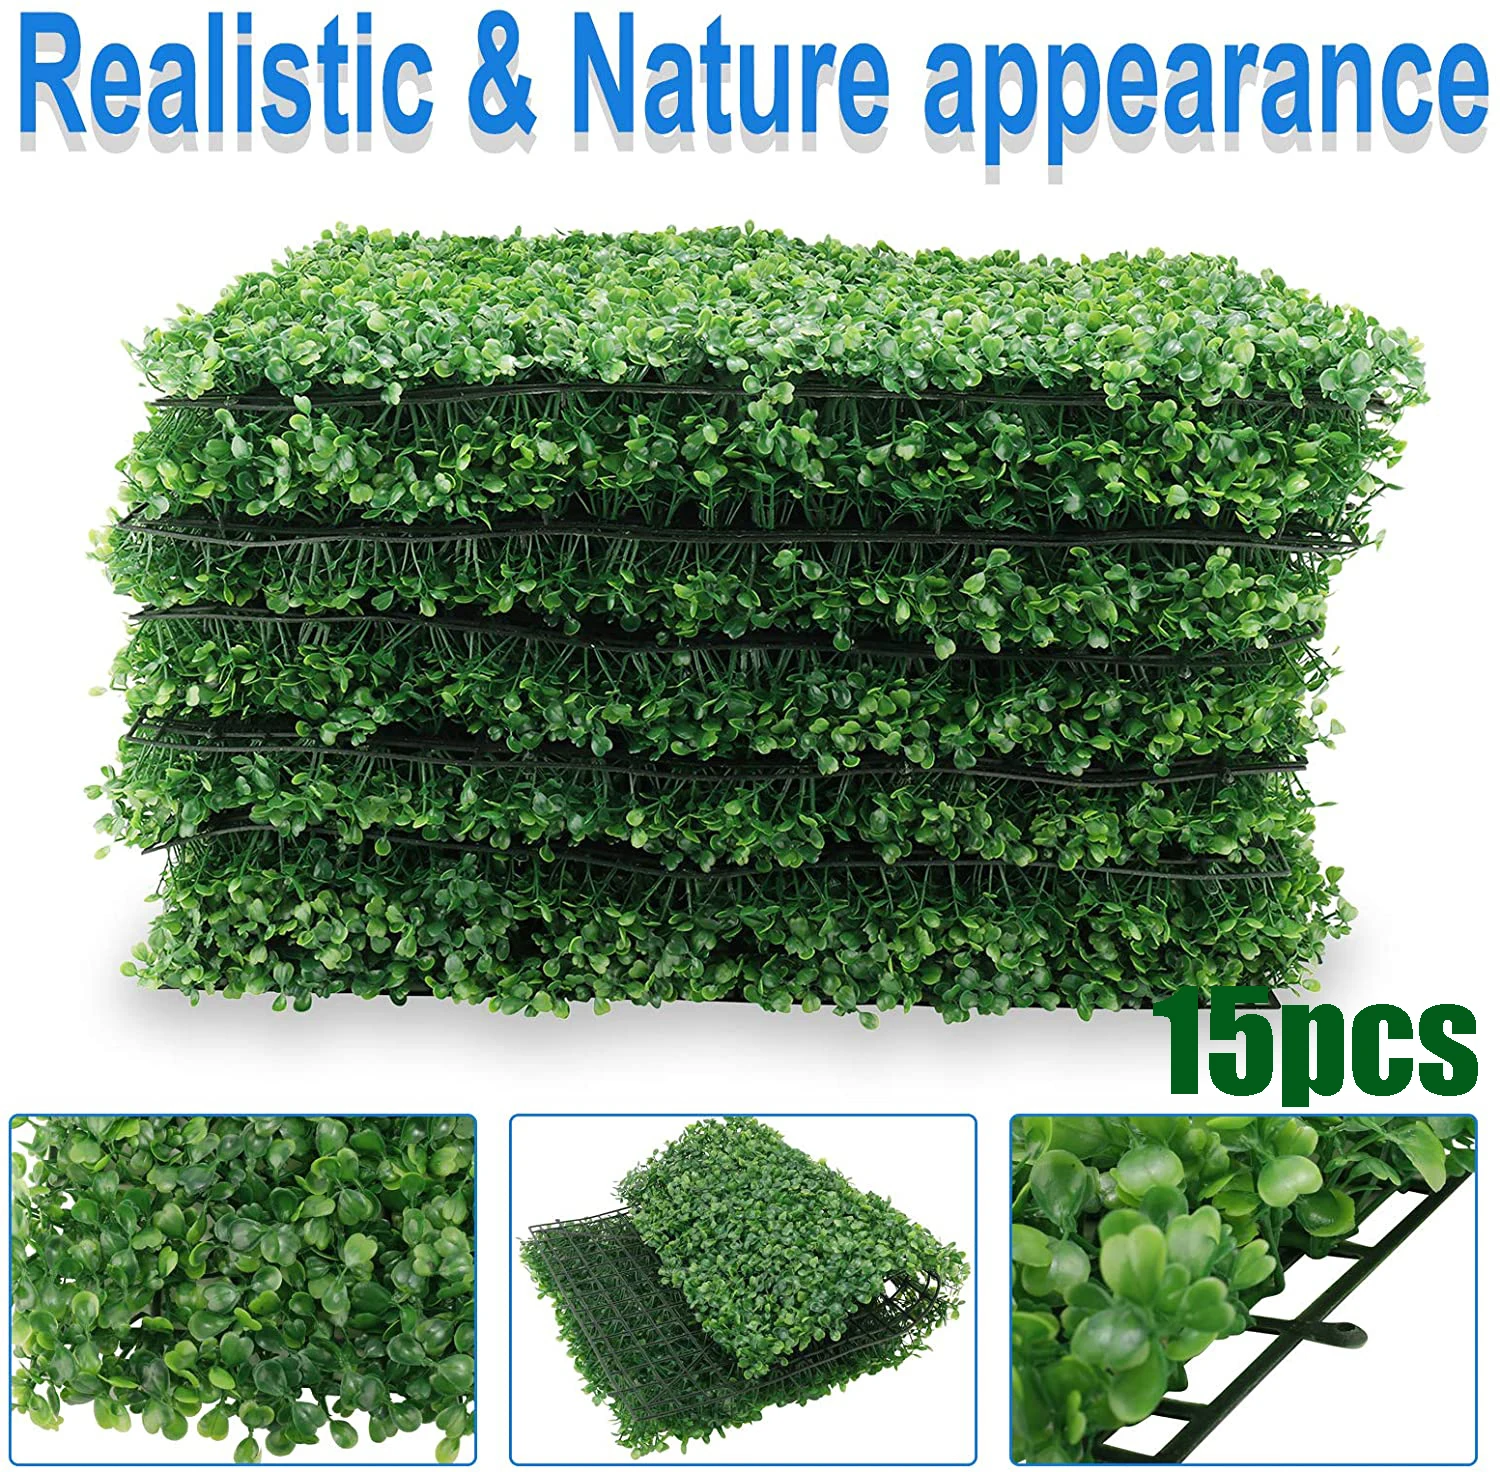 Artificial Greenery Boxwood, Privacy Fence Screen Faux Plant, UV Resistant Topiary Hedge,for Outdoor Indoor Use as Wall Backdrop